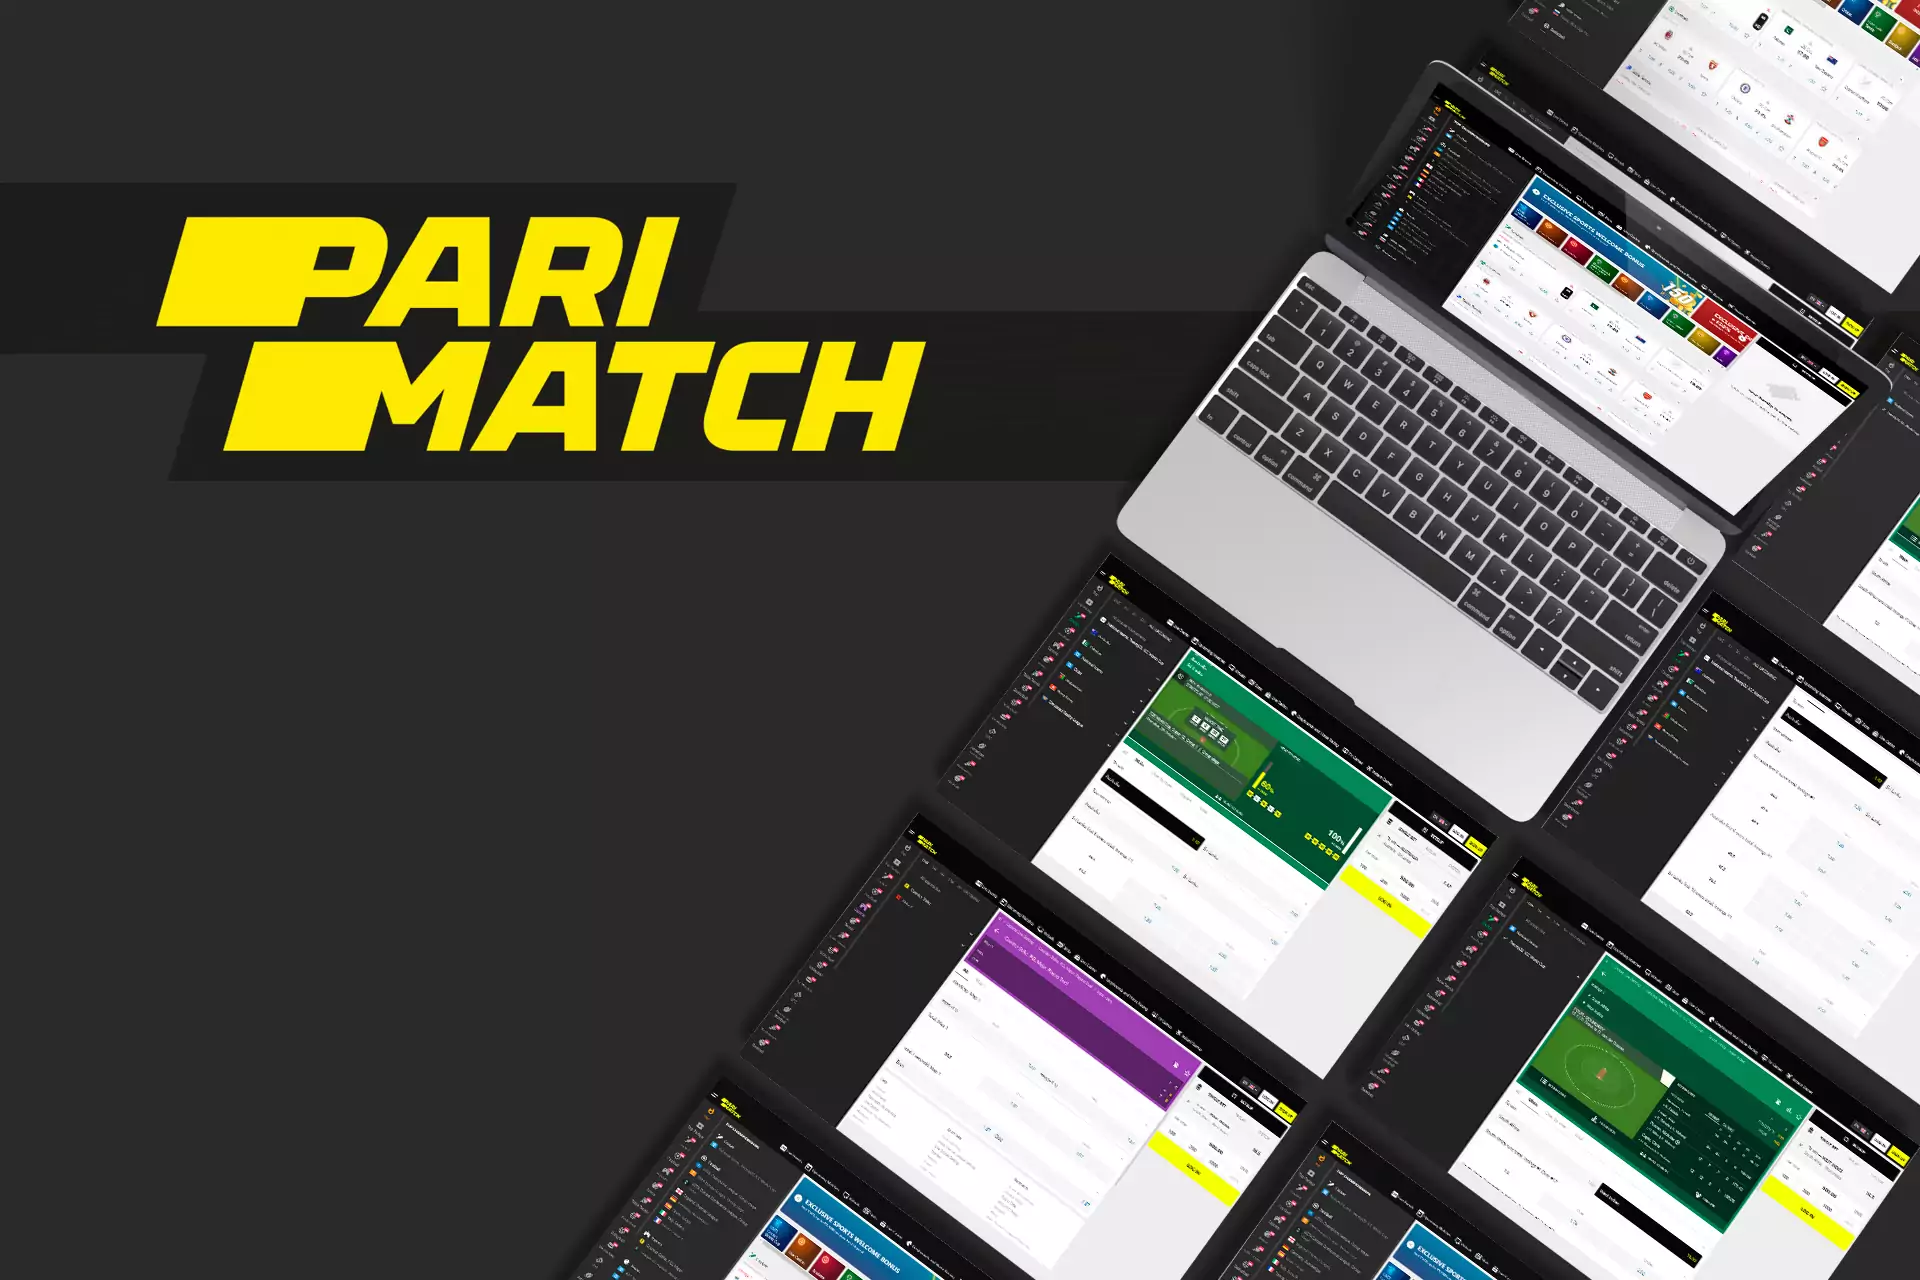 Parimatch is a trustworthy bookmaker with a great reputation.